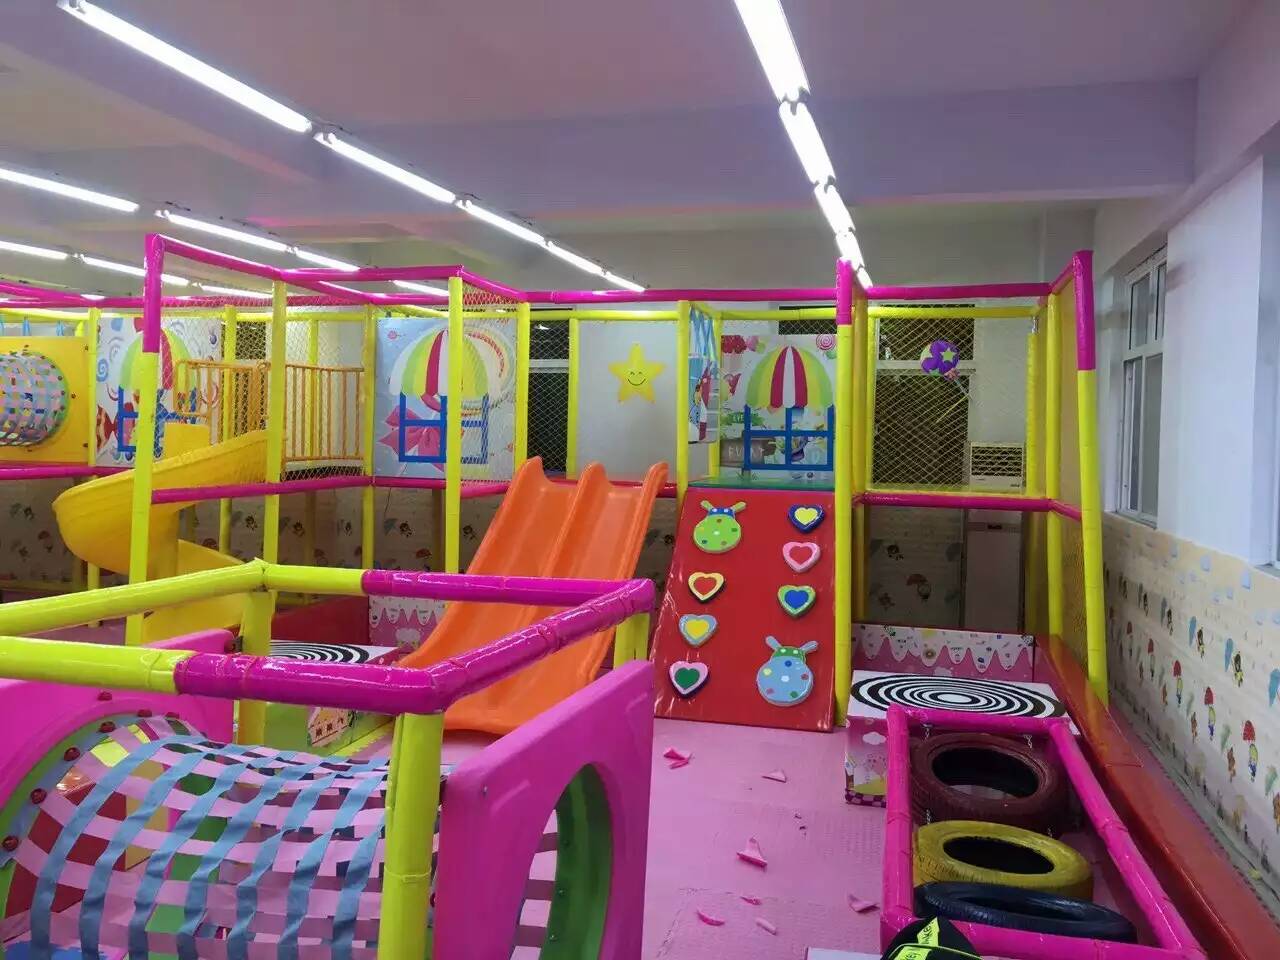 What should be paid attention to when designing an indoor playground? - Company News - 1